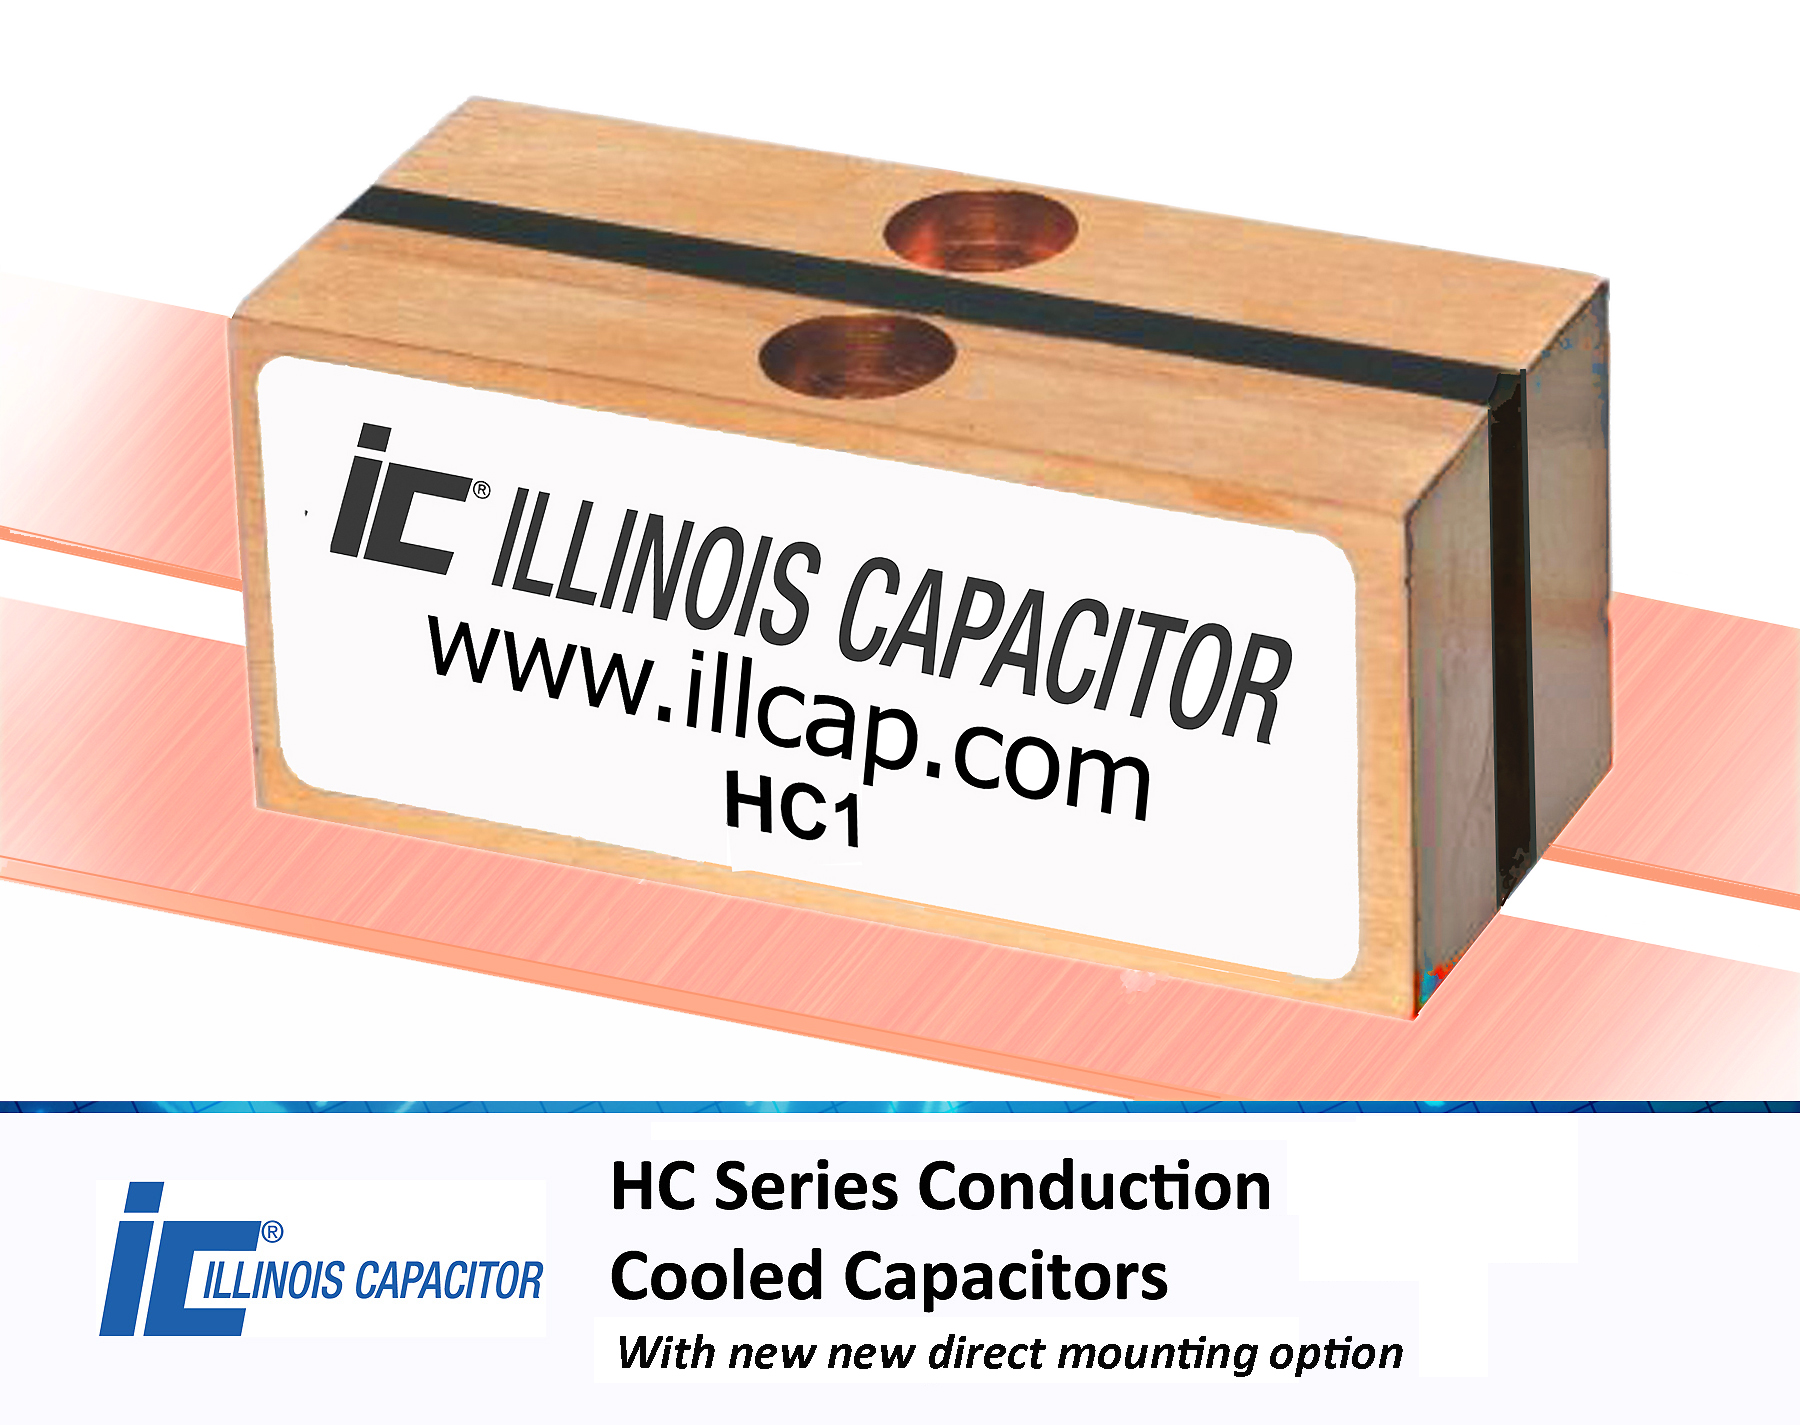 Conduction-Cooled Capacitors Include Direct Mounting Options